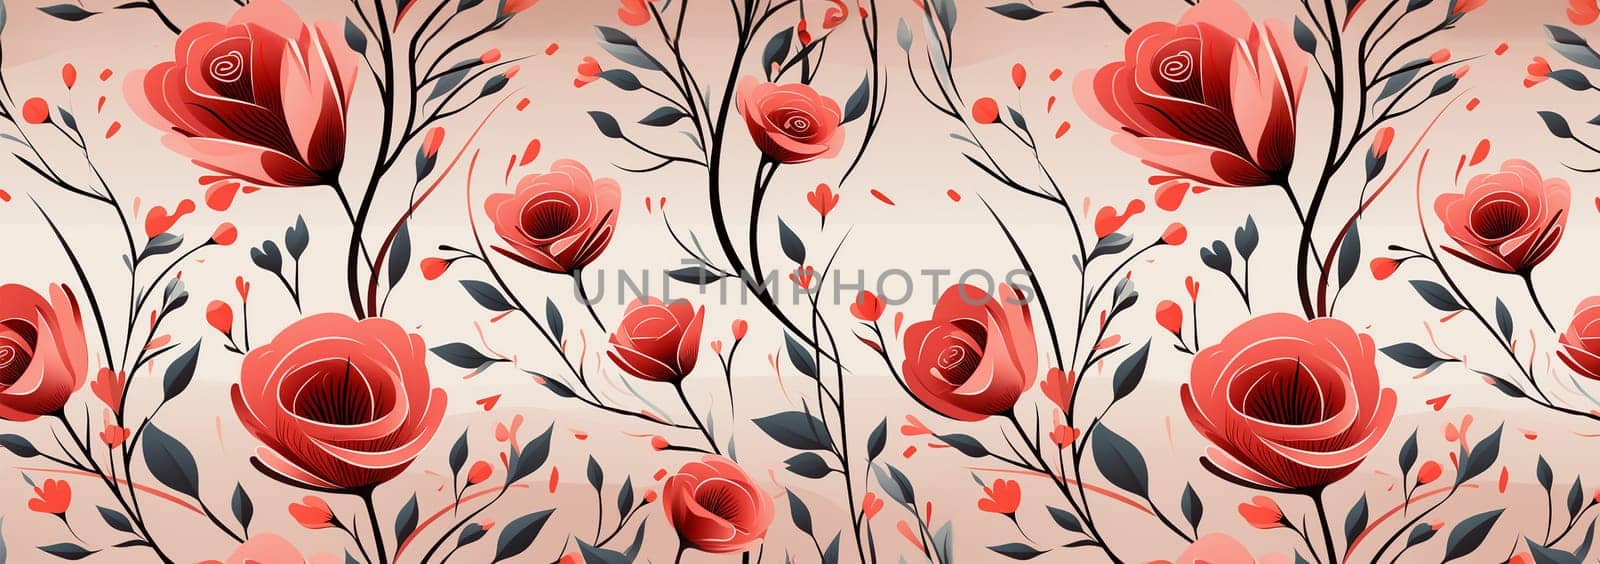 Pastel colored rose pattern background. Seamless pattern floral beautiful pink pastel Rose flowers vintage abstract background.pink illustration hand drawing dry watercolor.for fabric textile design or Product packaging Valentine